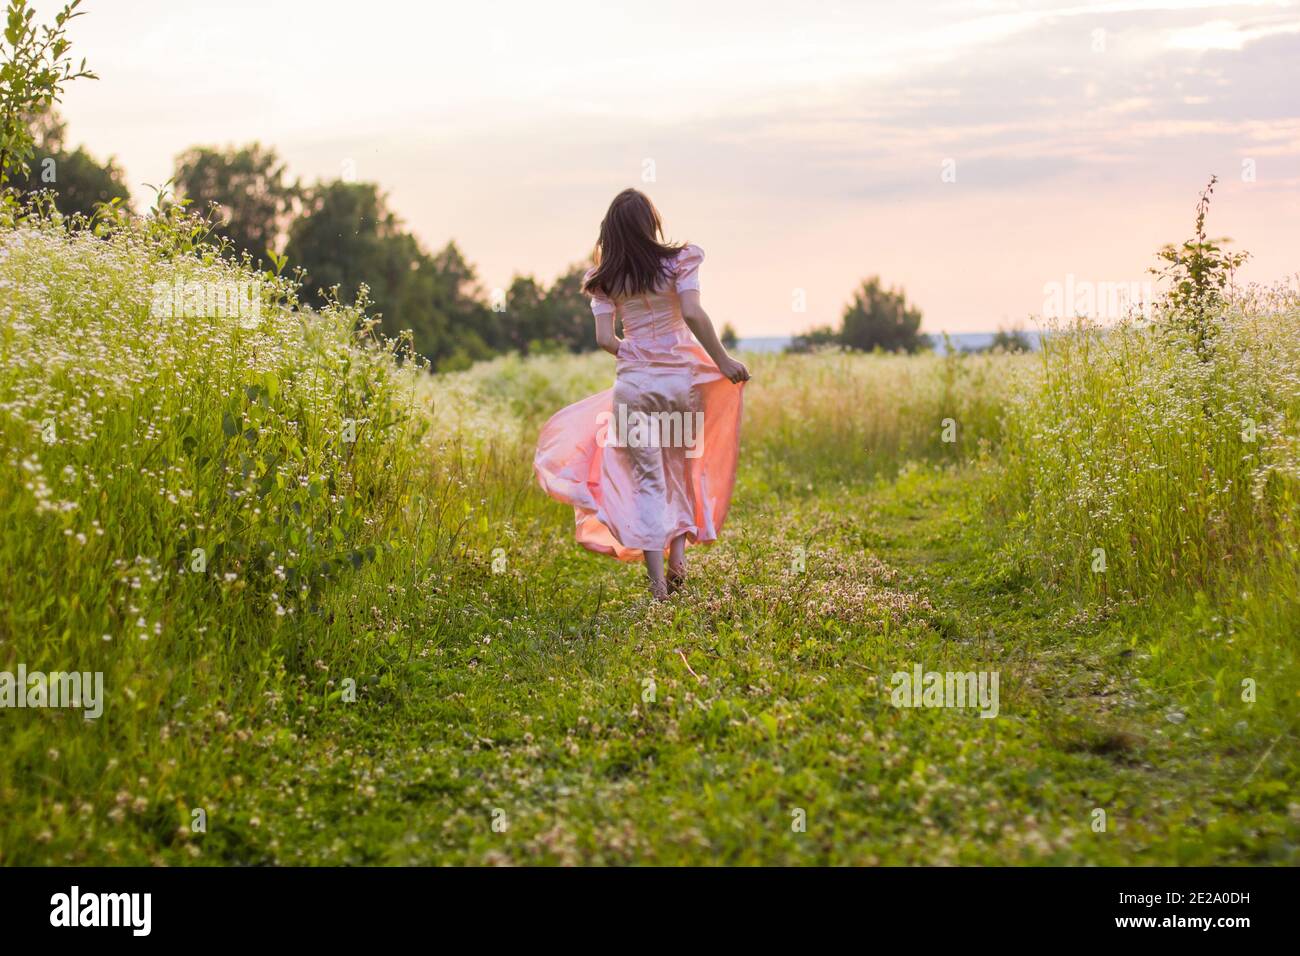 girl running across the field in a pink dress Stock Photo